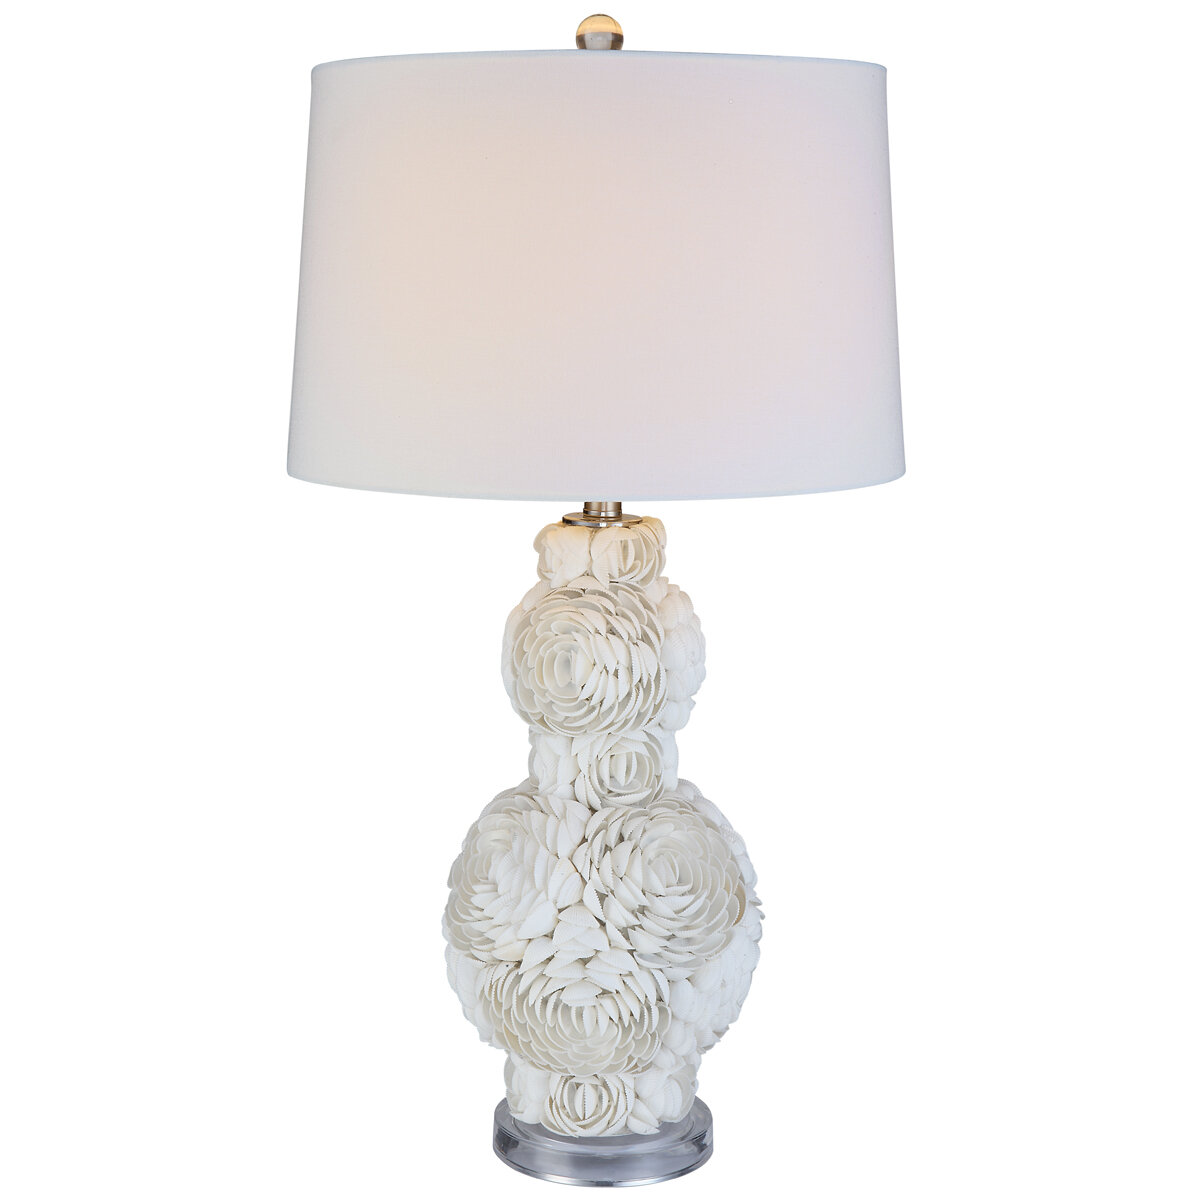 Rosecliff Heights Wilshire Shell 29 Table Lamp Set Reviews Wayfair